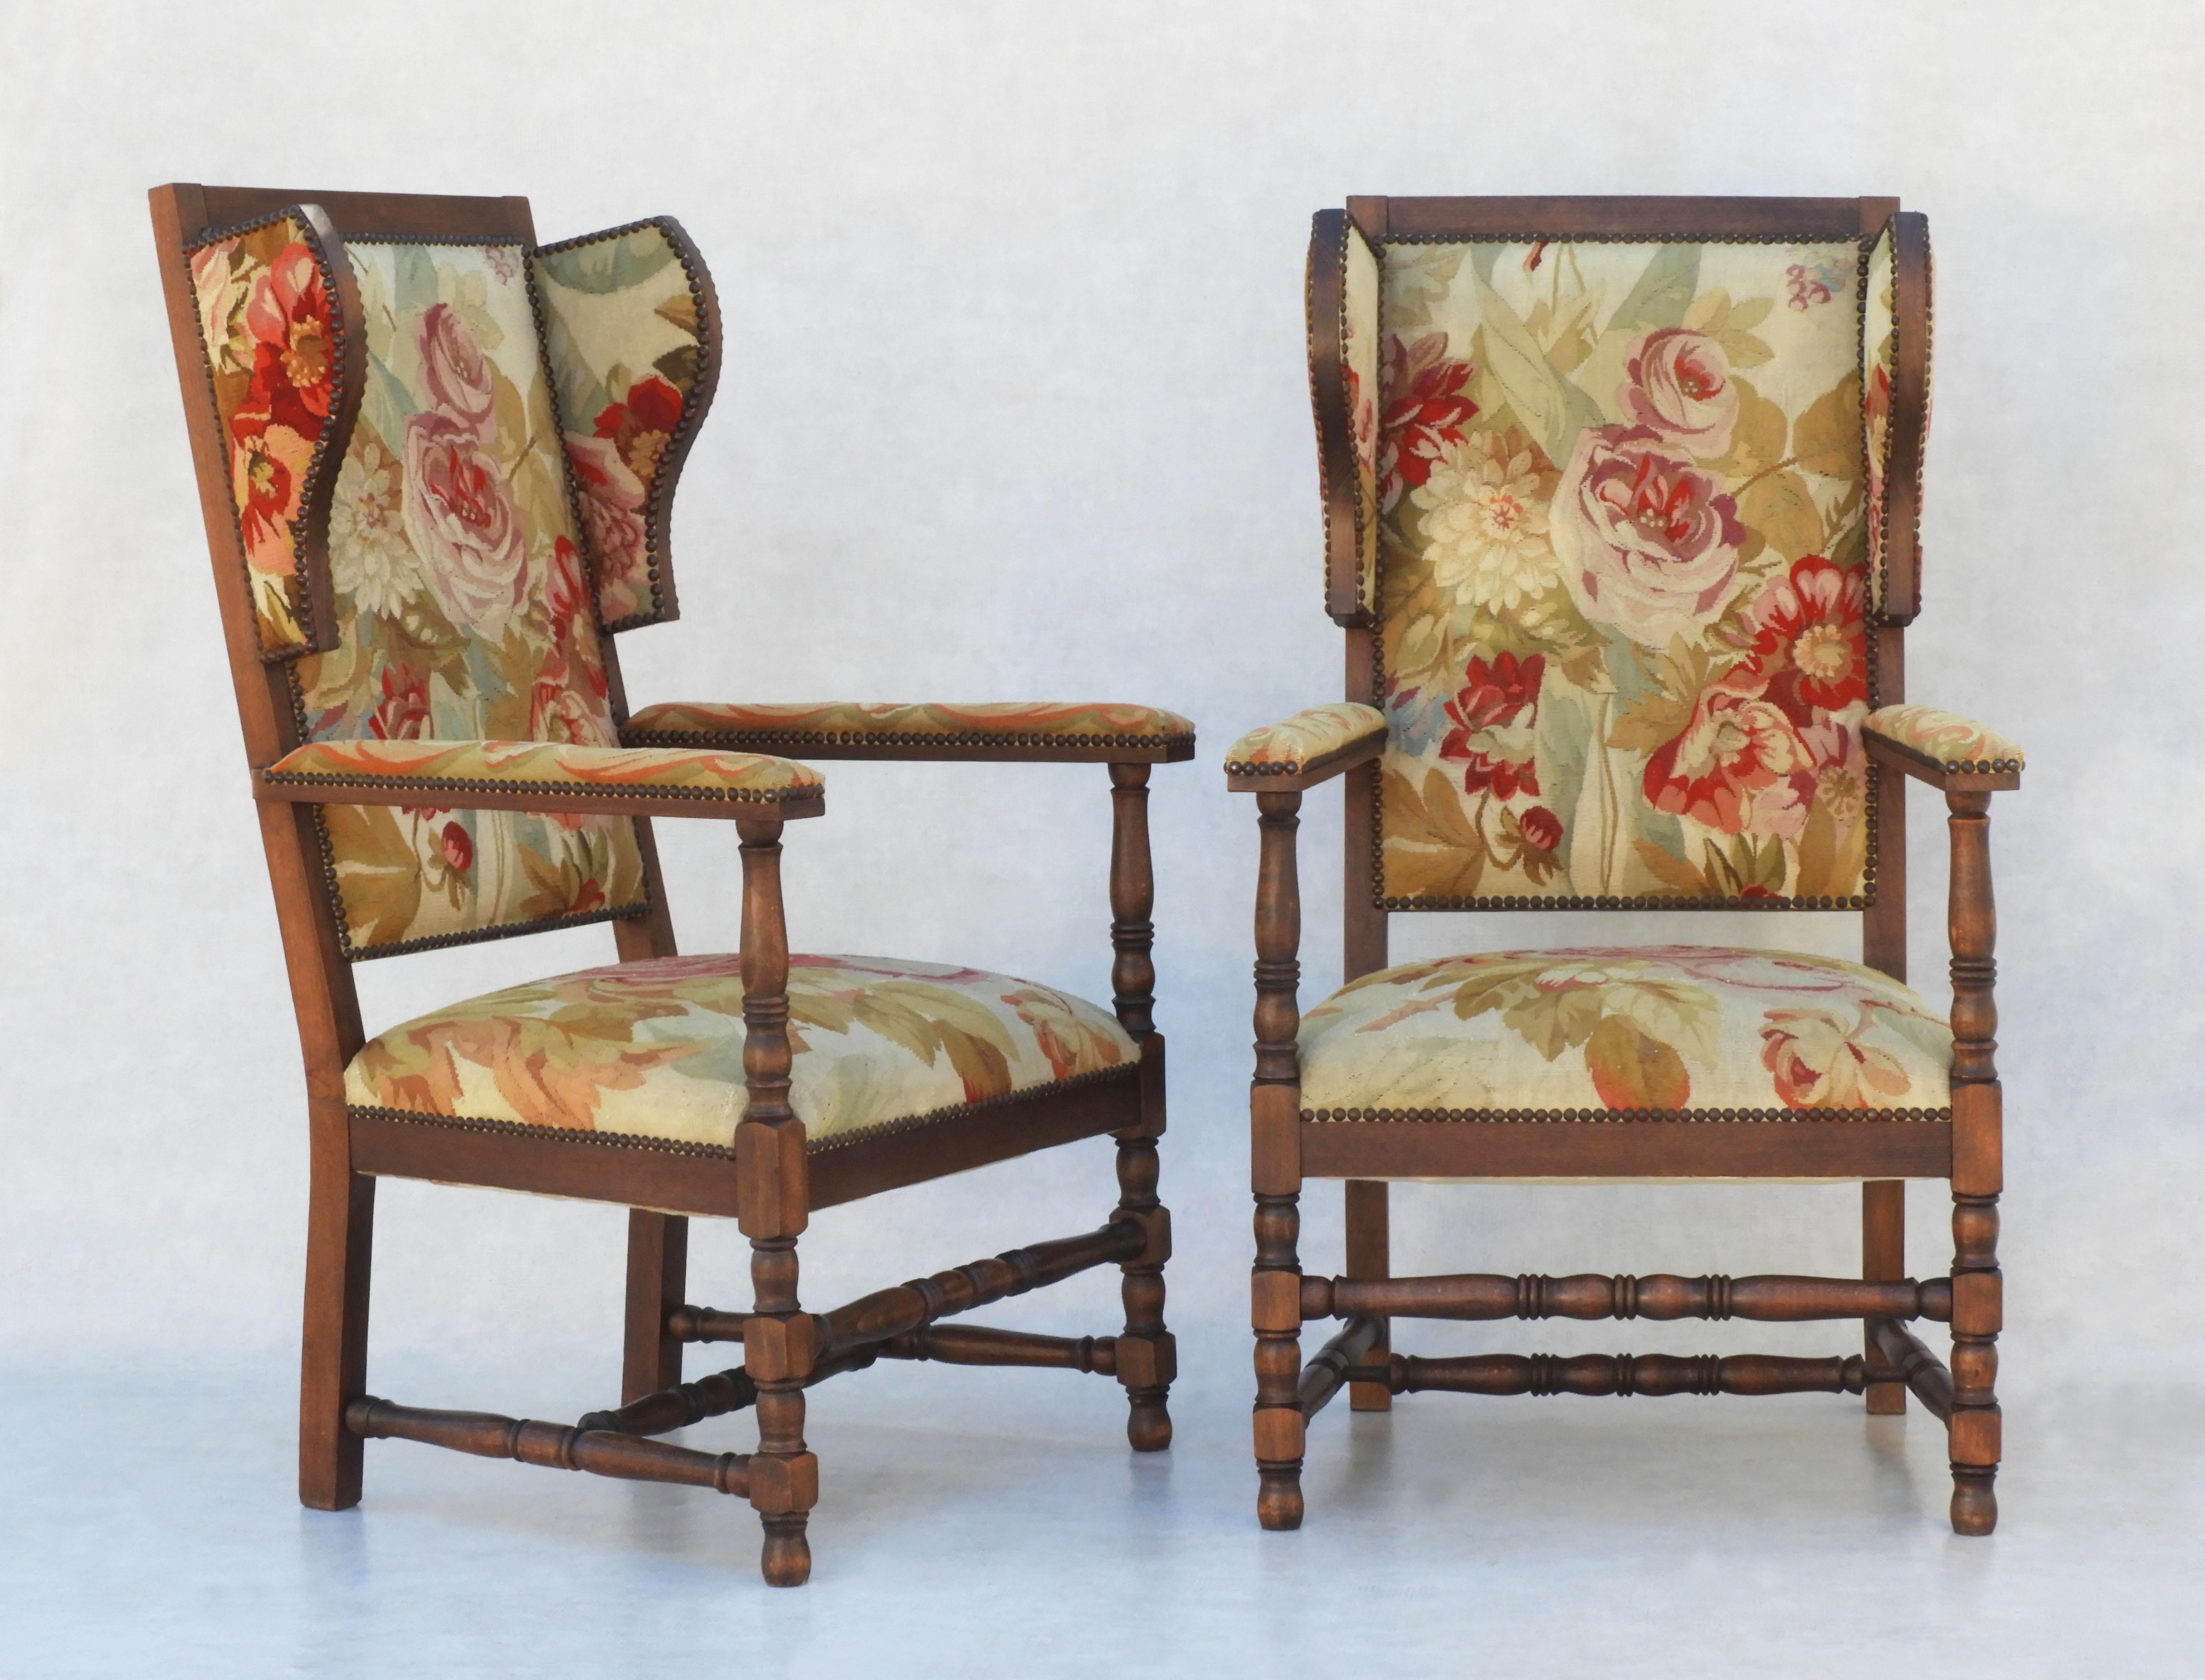 Charming pair of Provincial French wingback chairs. An unusual duo of oak-framed armchairs upholstered in a striking rose-themed floral tapestry. All original and thought to be a totally unique pair. In good vintage condition, comfortable, sturdy